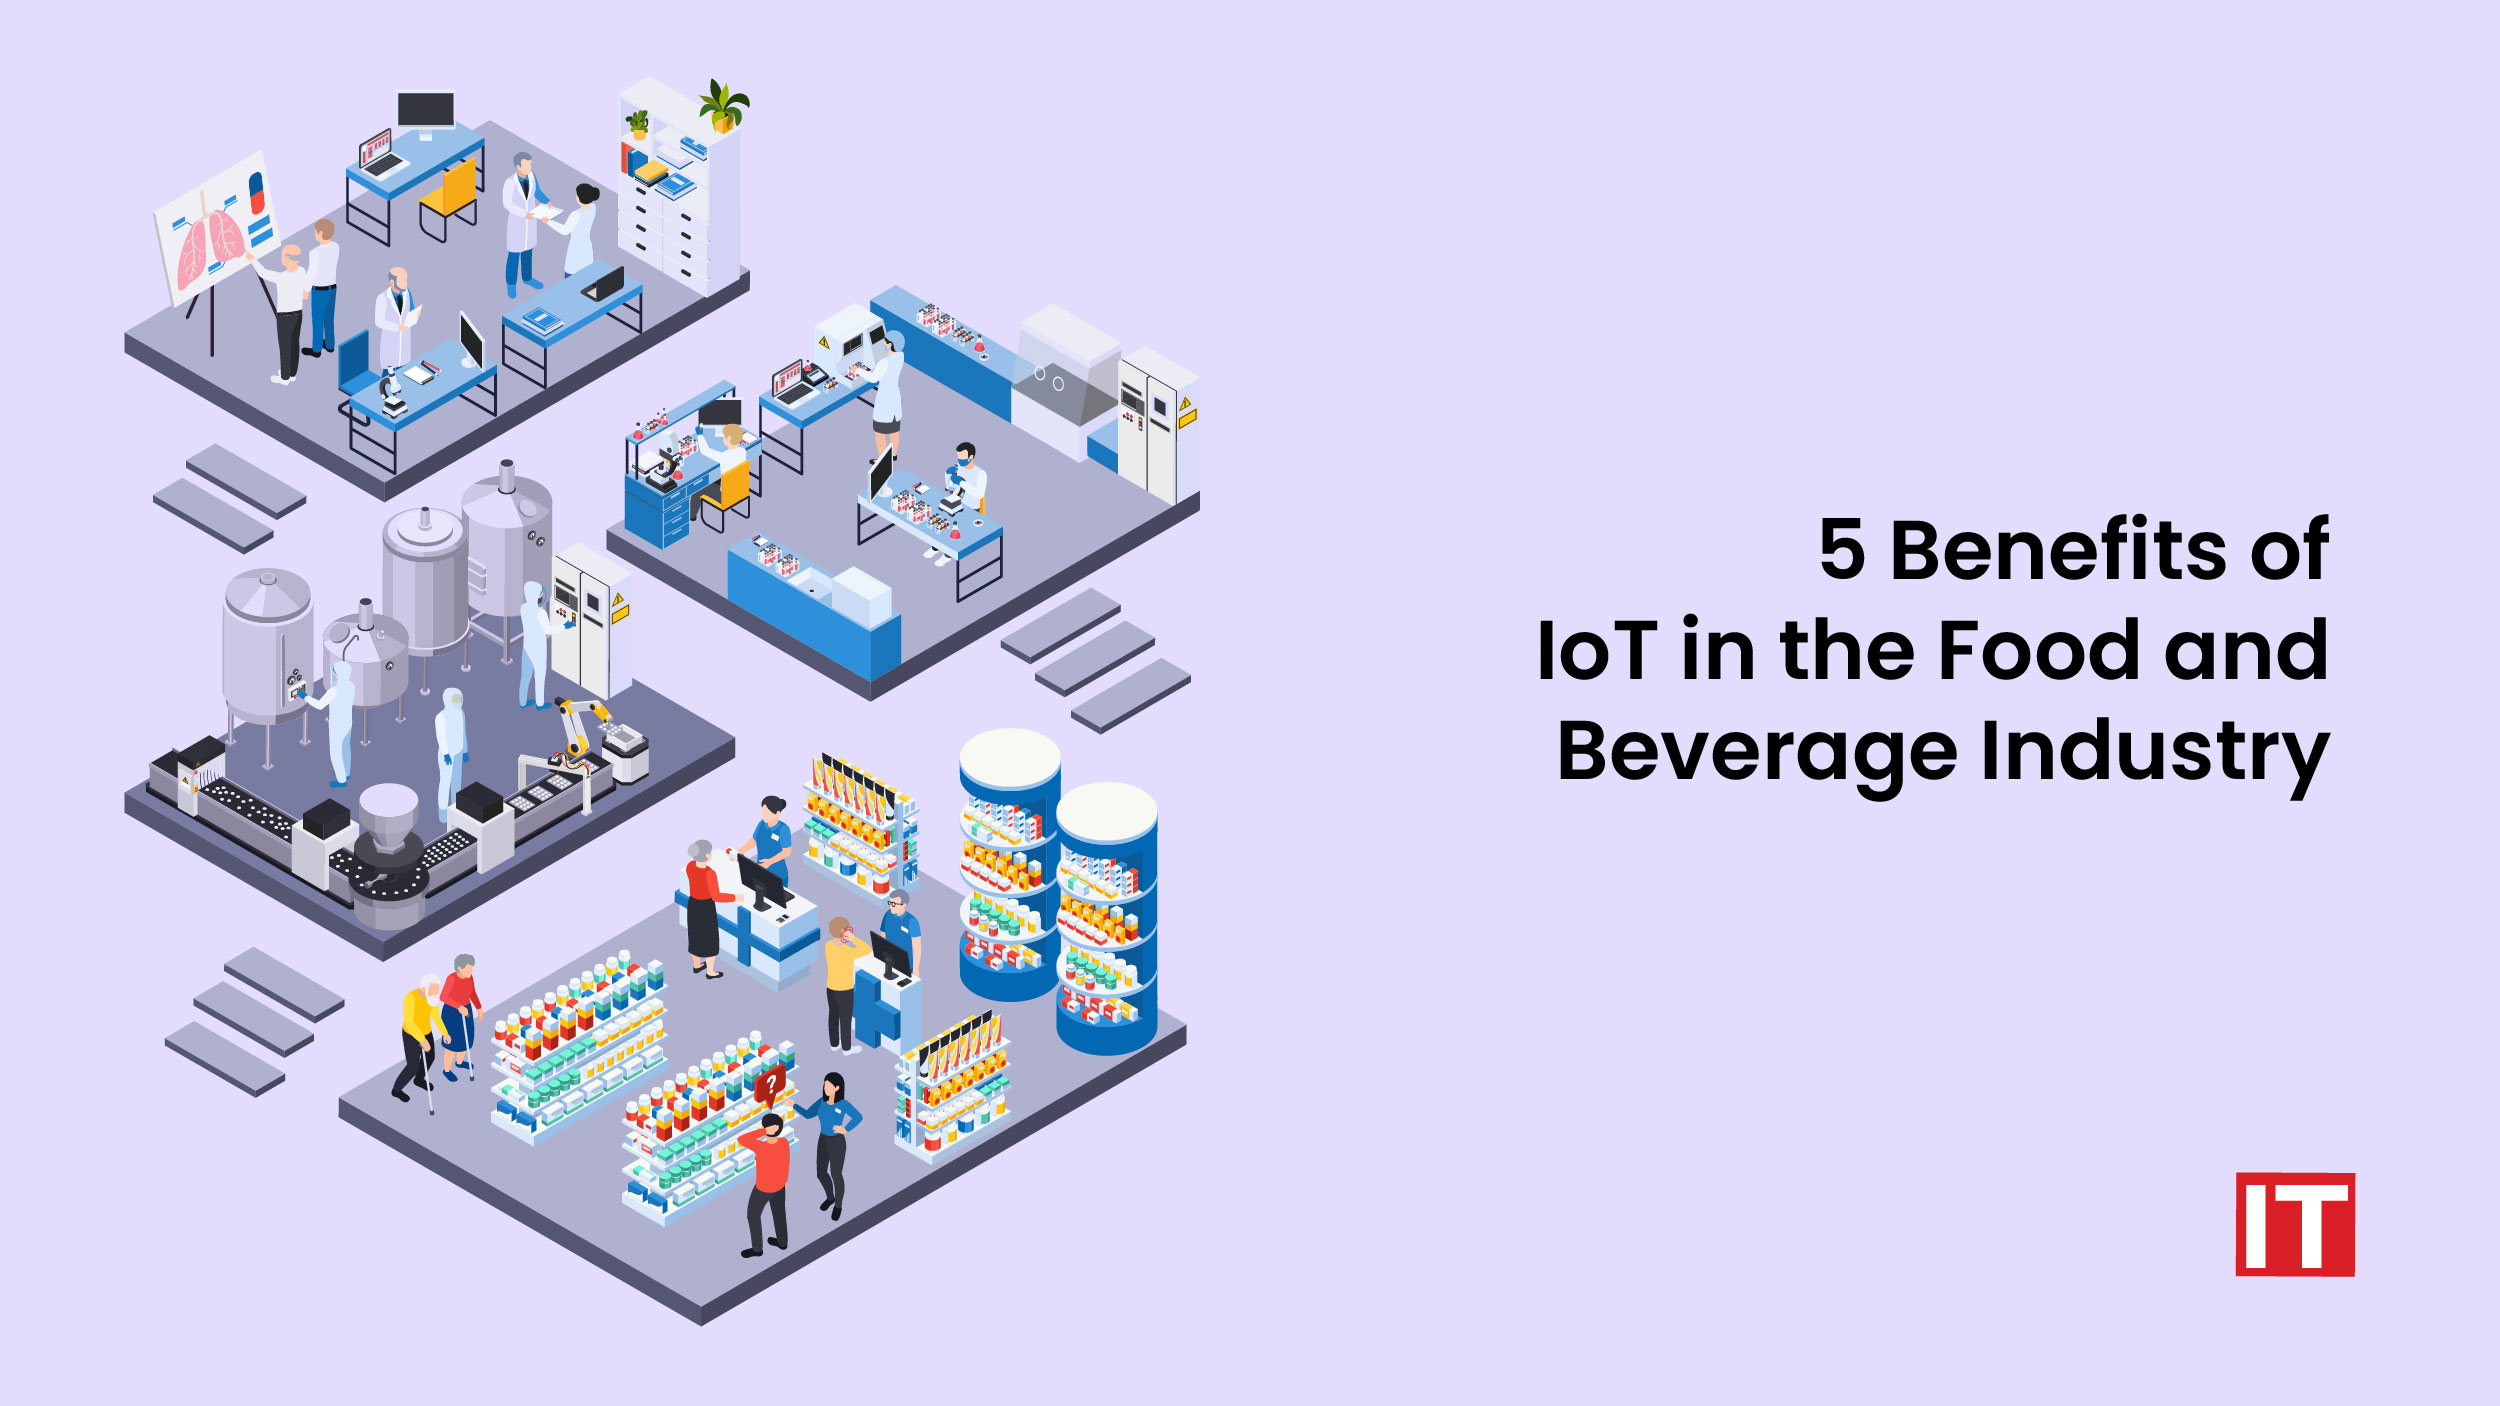 IoT in the Food and Beverage